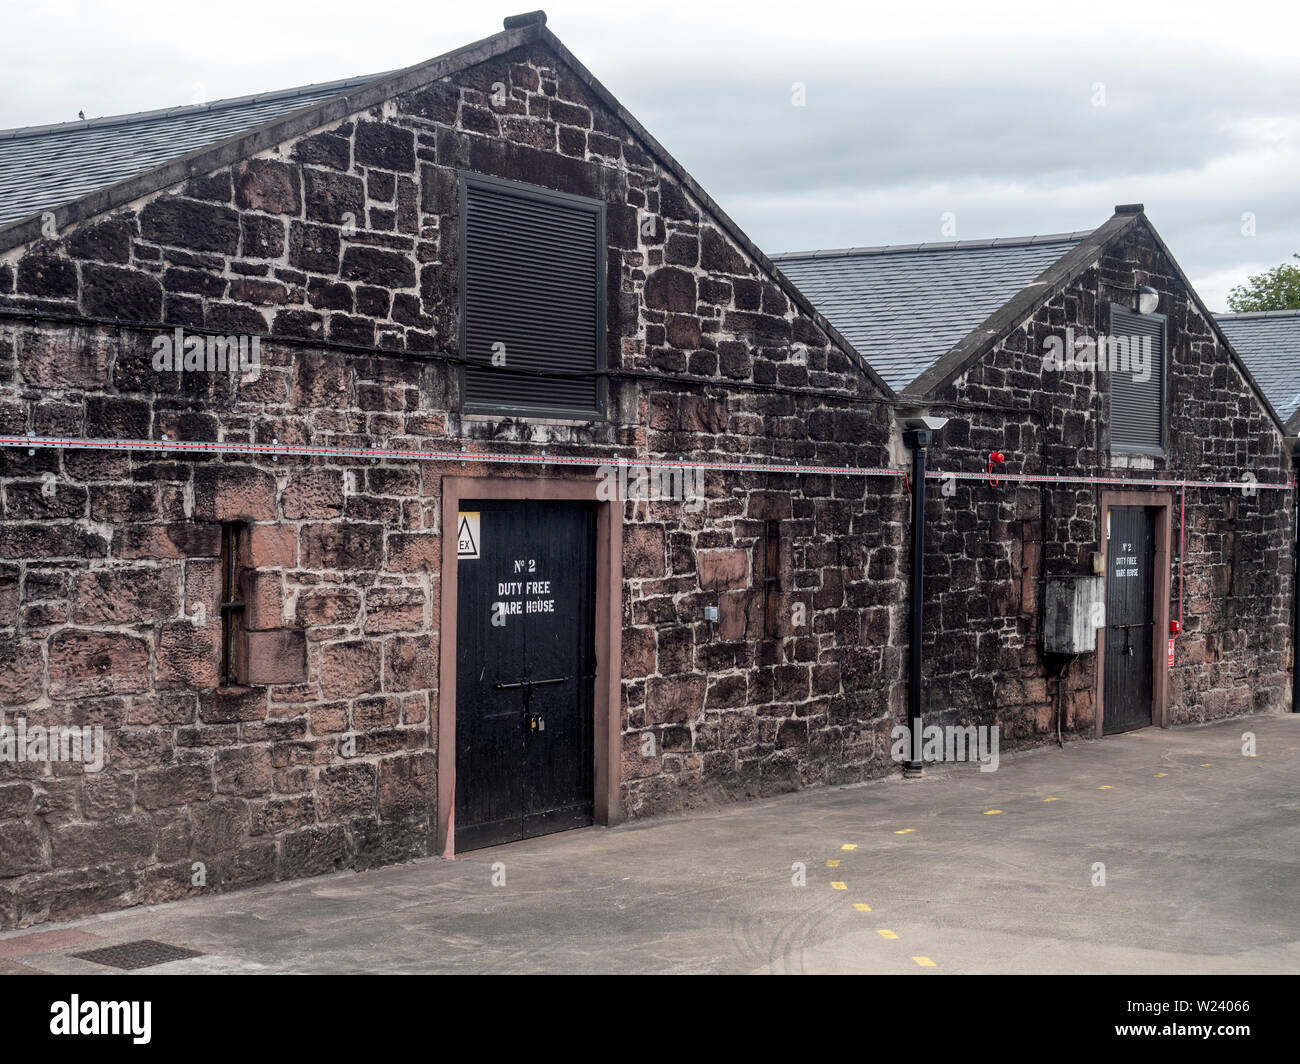 Bonded Warehouses at a Distillery in Scotland Stock Photo